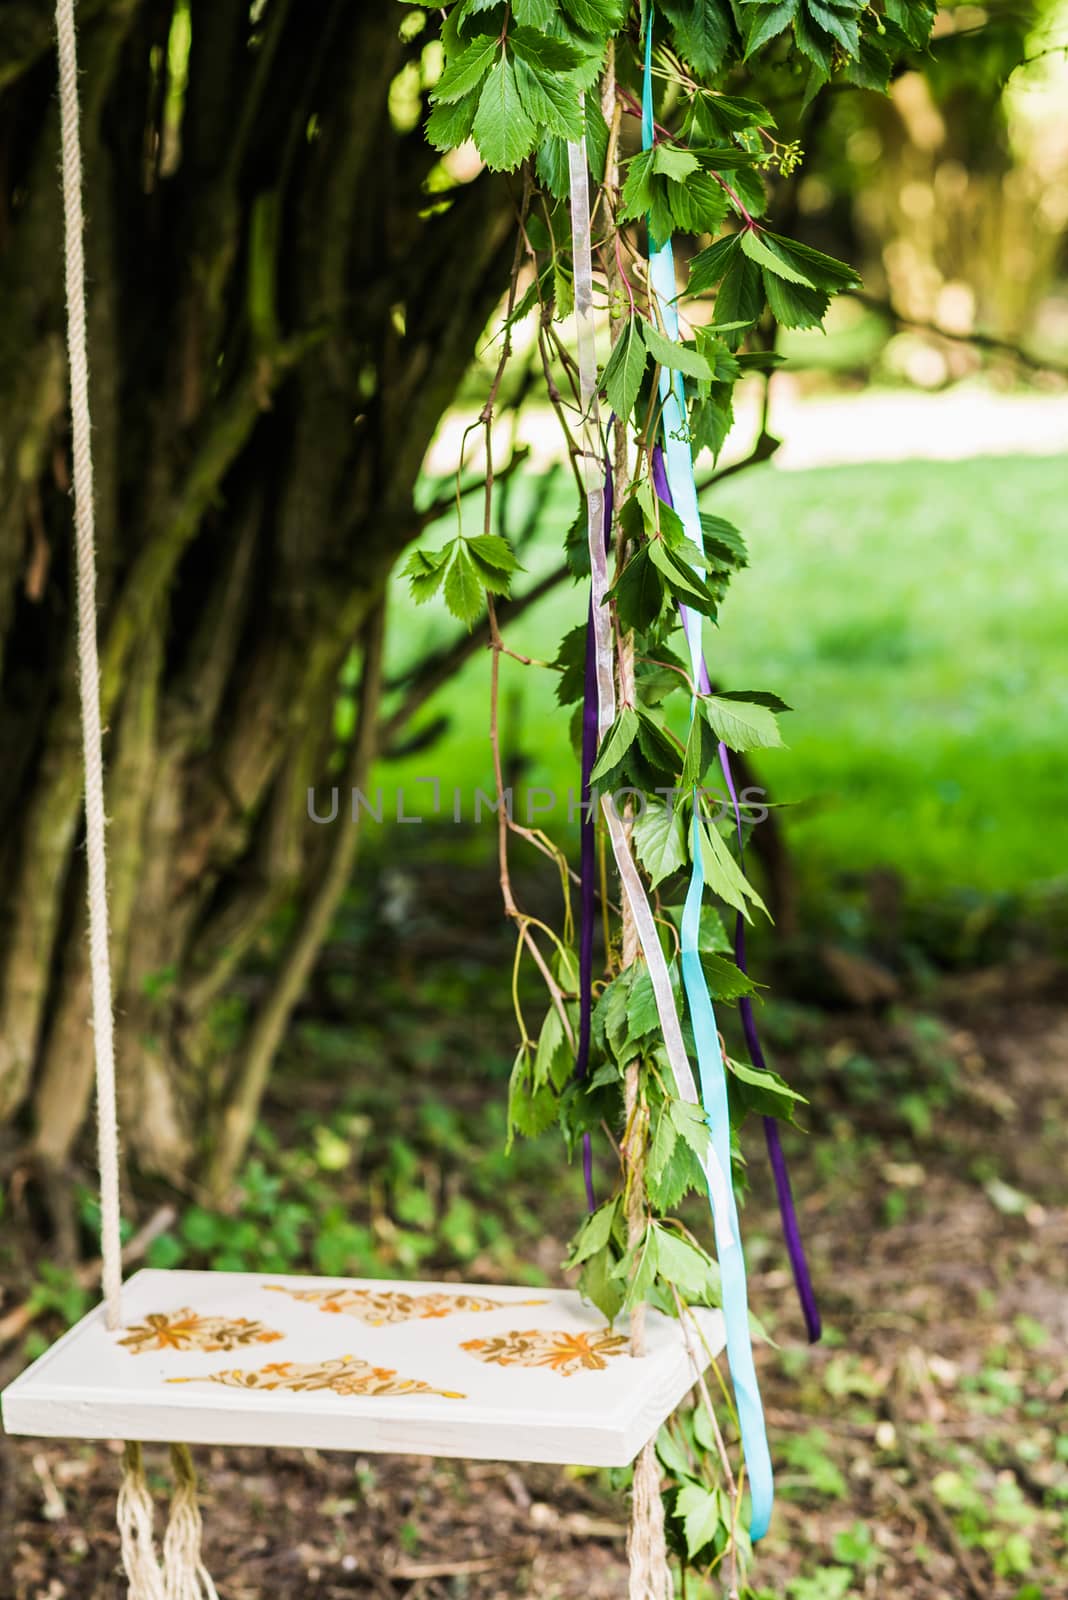 Old wooden swing hanging from a tree decorated with leaves on green grass background